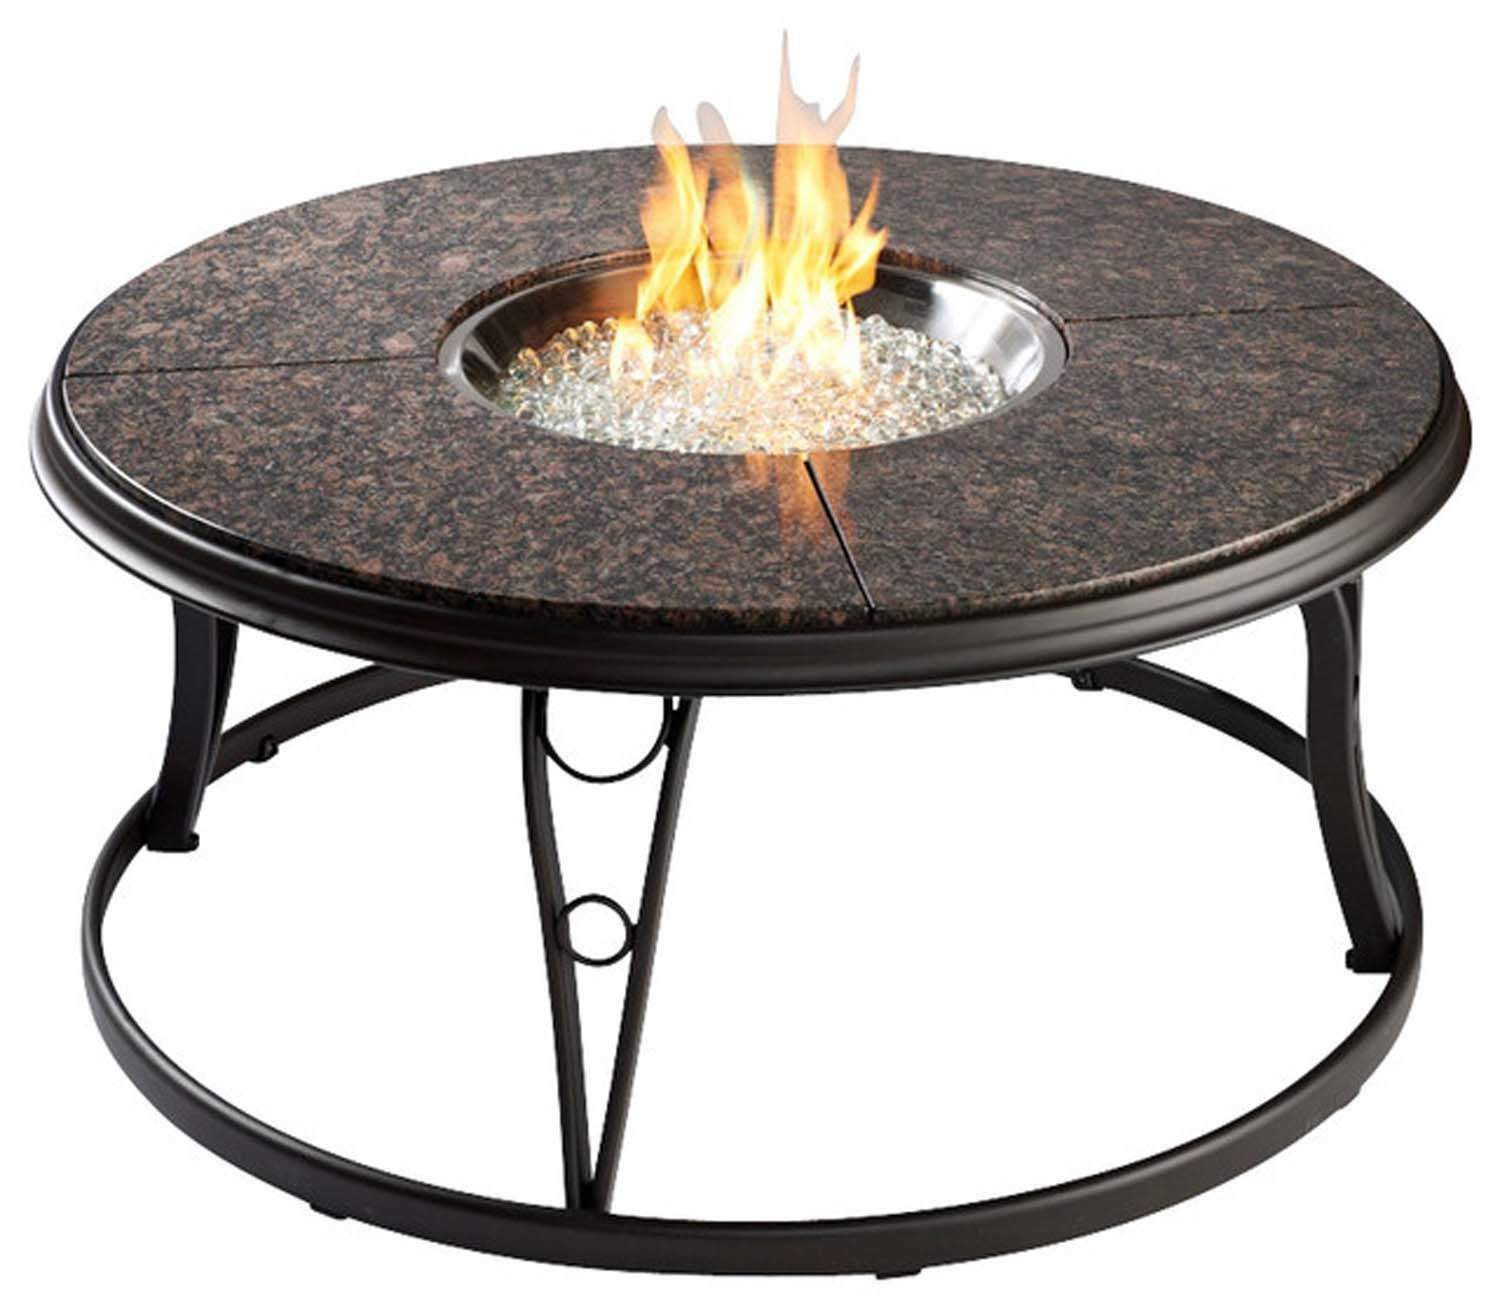 Fire Pit Patio Tables
 Outdoor Greatroom Granite 42 Inch Round Gas Fire Pit Table